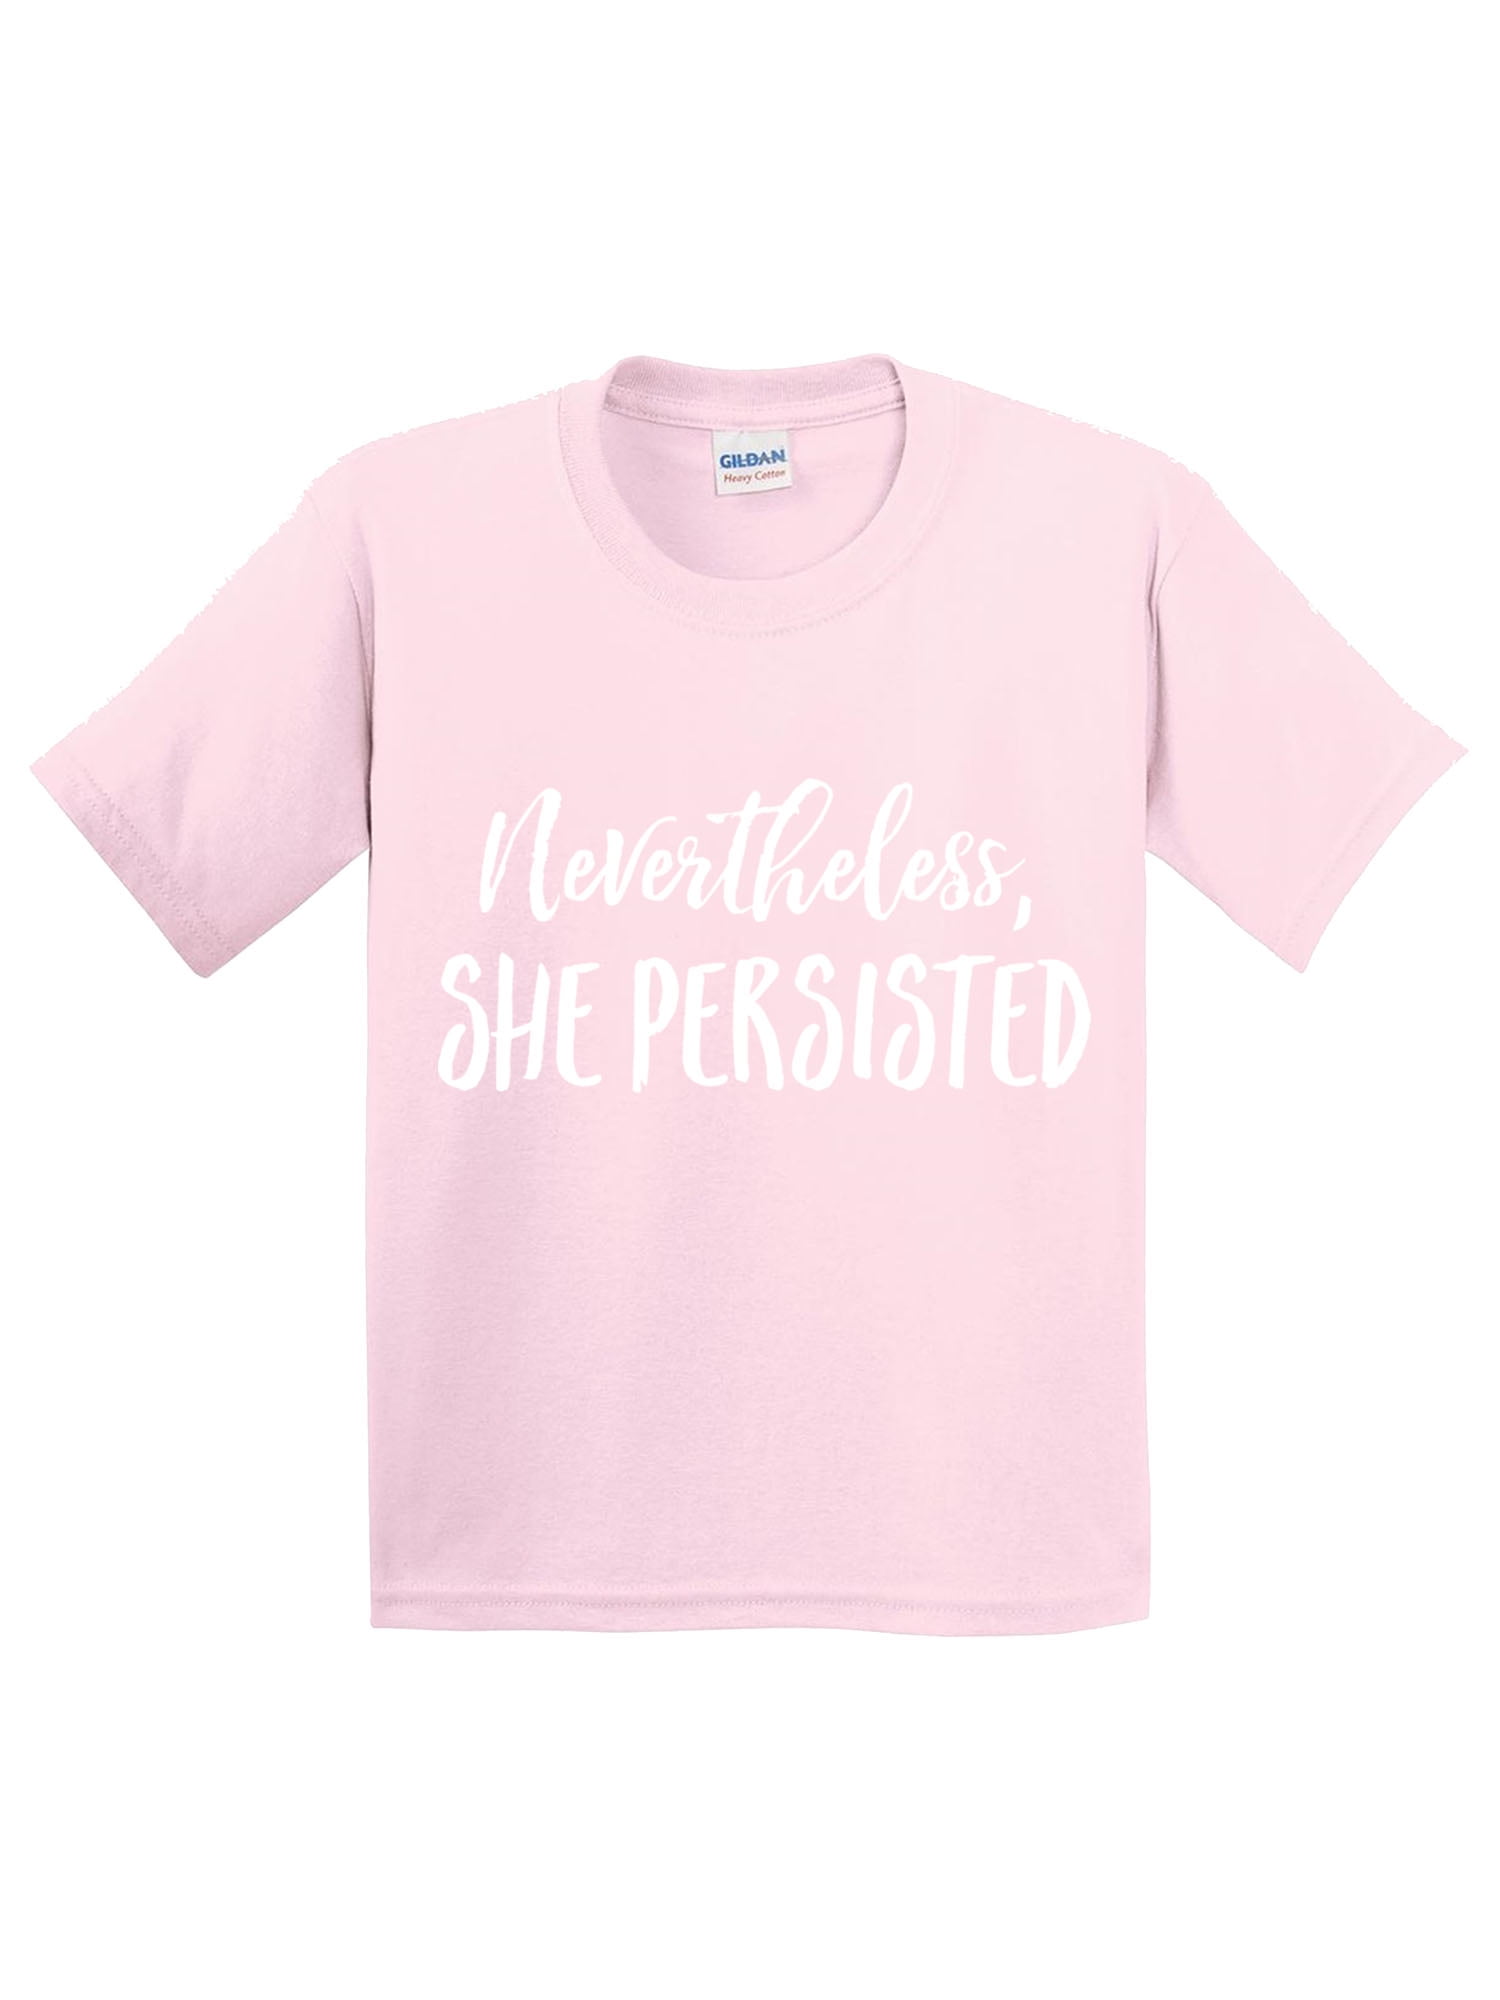 Expression Tees Nevertheless She Persisted Youth-Sized Hoodie